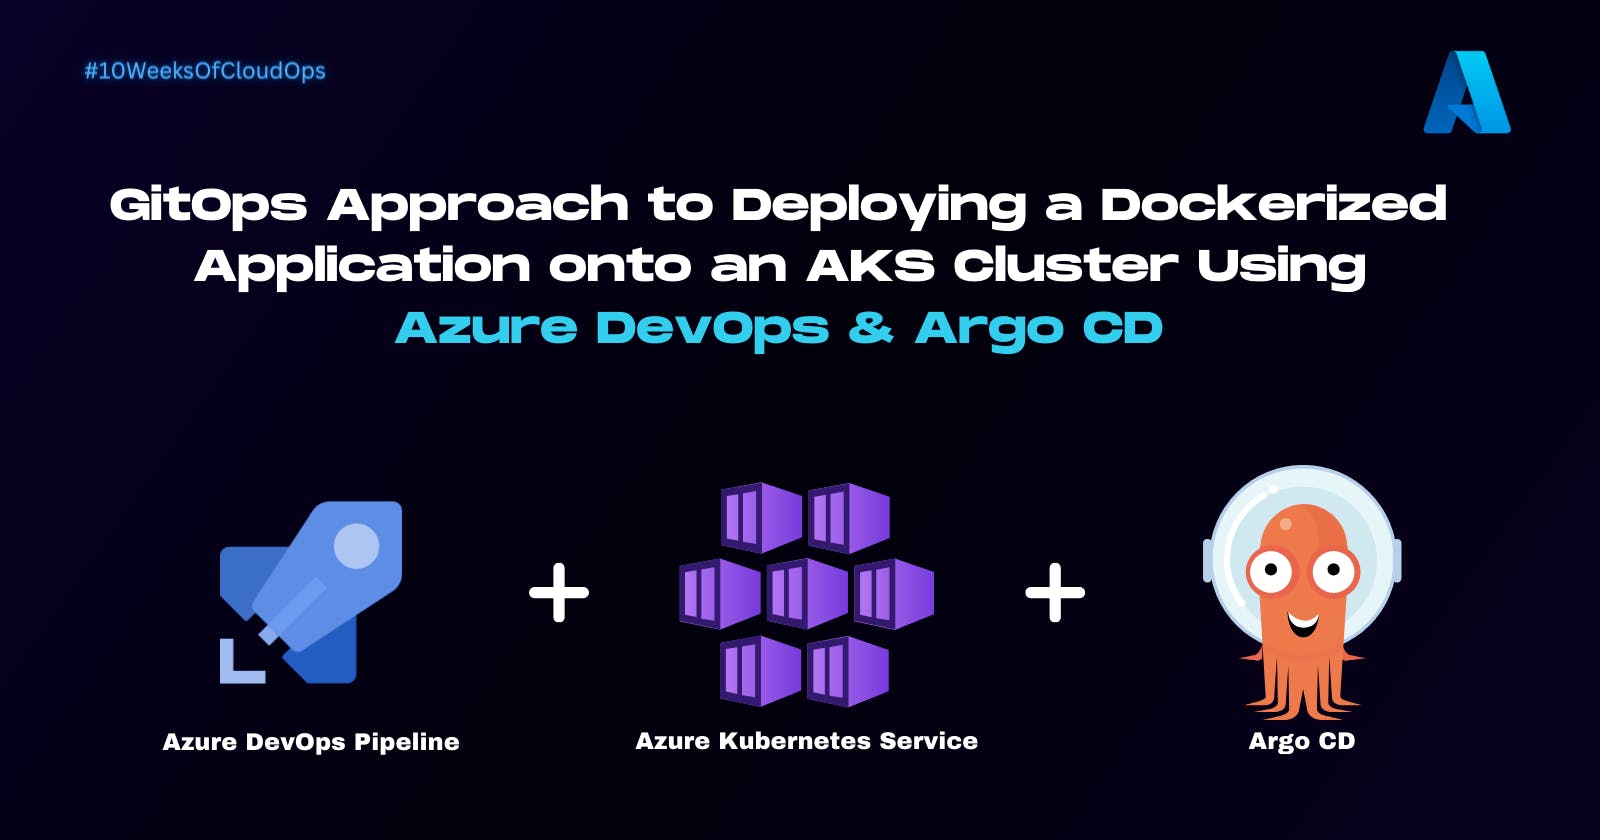 Utilizing GitOps Approach and Azure Pipelines to Deploy a Dockerized Application onto an AKS Cluster via ArgoCD